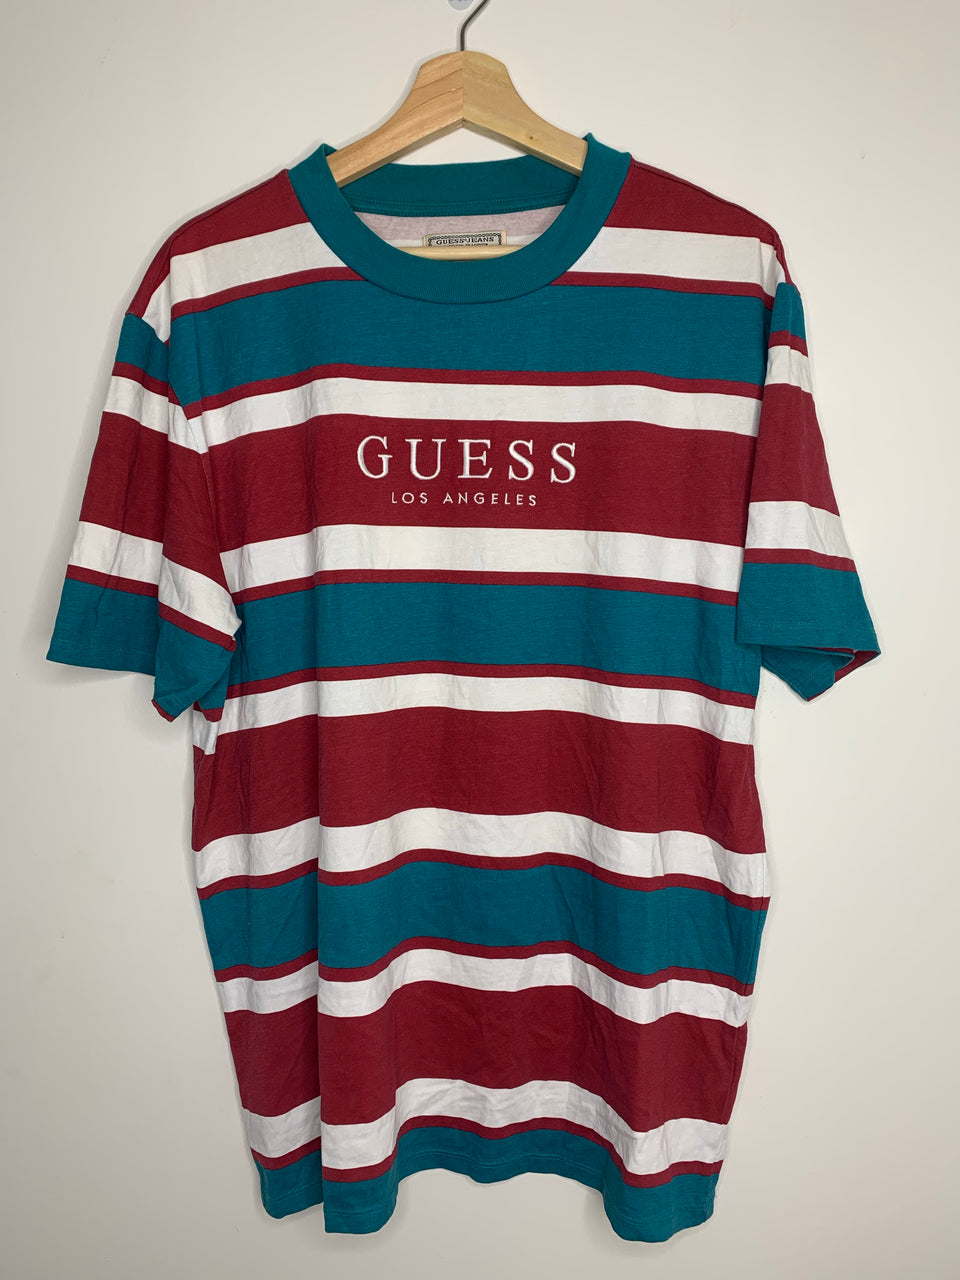 red white and blue guess shirt